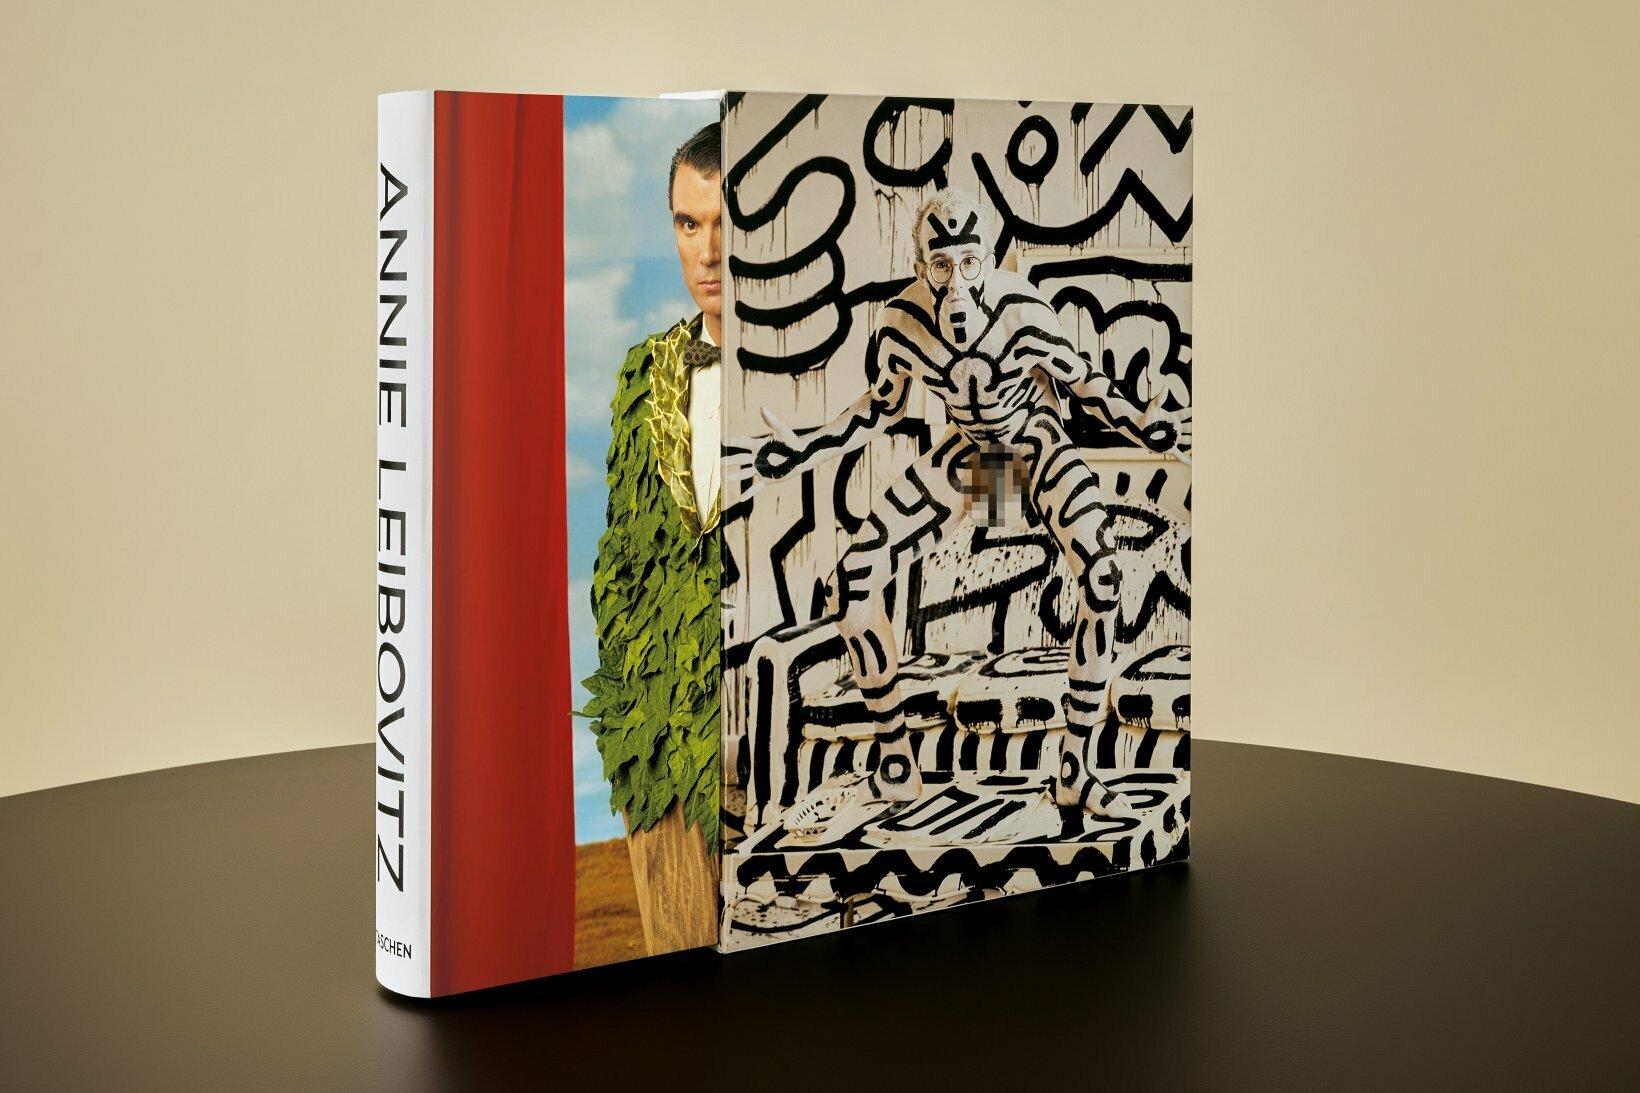 Art Edition “Keith Haring” (No. 1–1,000). Hardcover volume in a slipcase, accompanied by a numbered, signed, and framed dye-sublimation ChromaLuxe aluminum print of Keith Haring, New York City, 1986.

For over 50 years, Annie Leibovitz has been